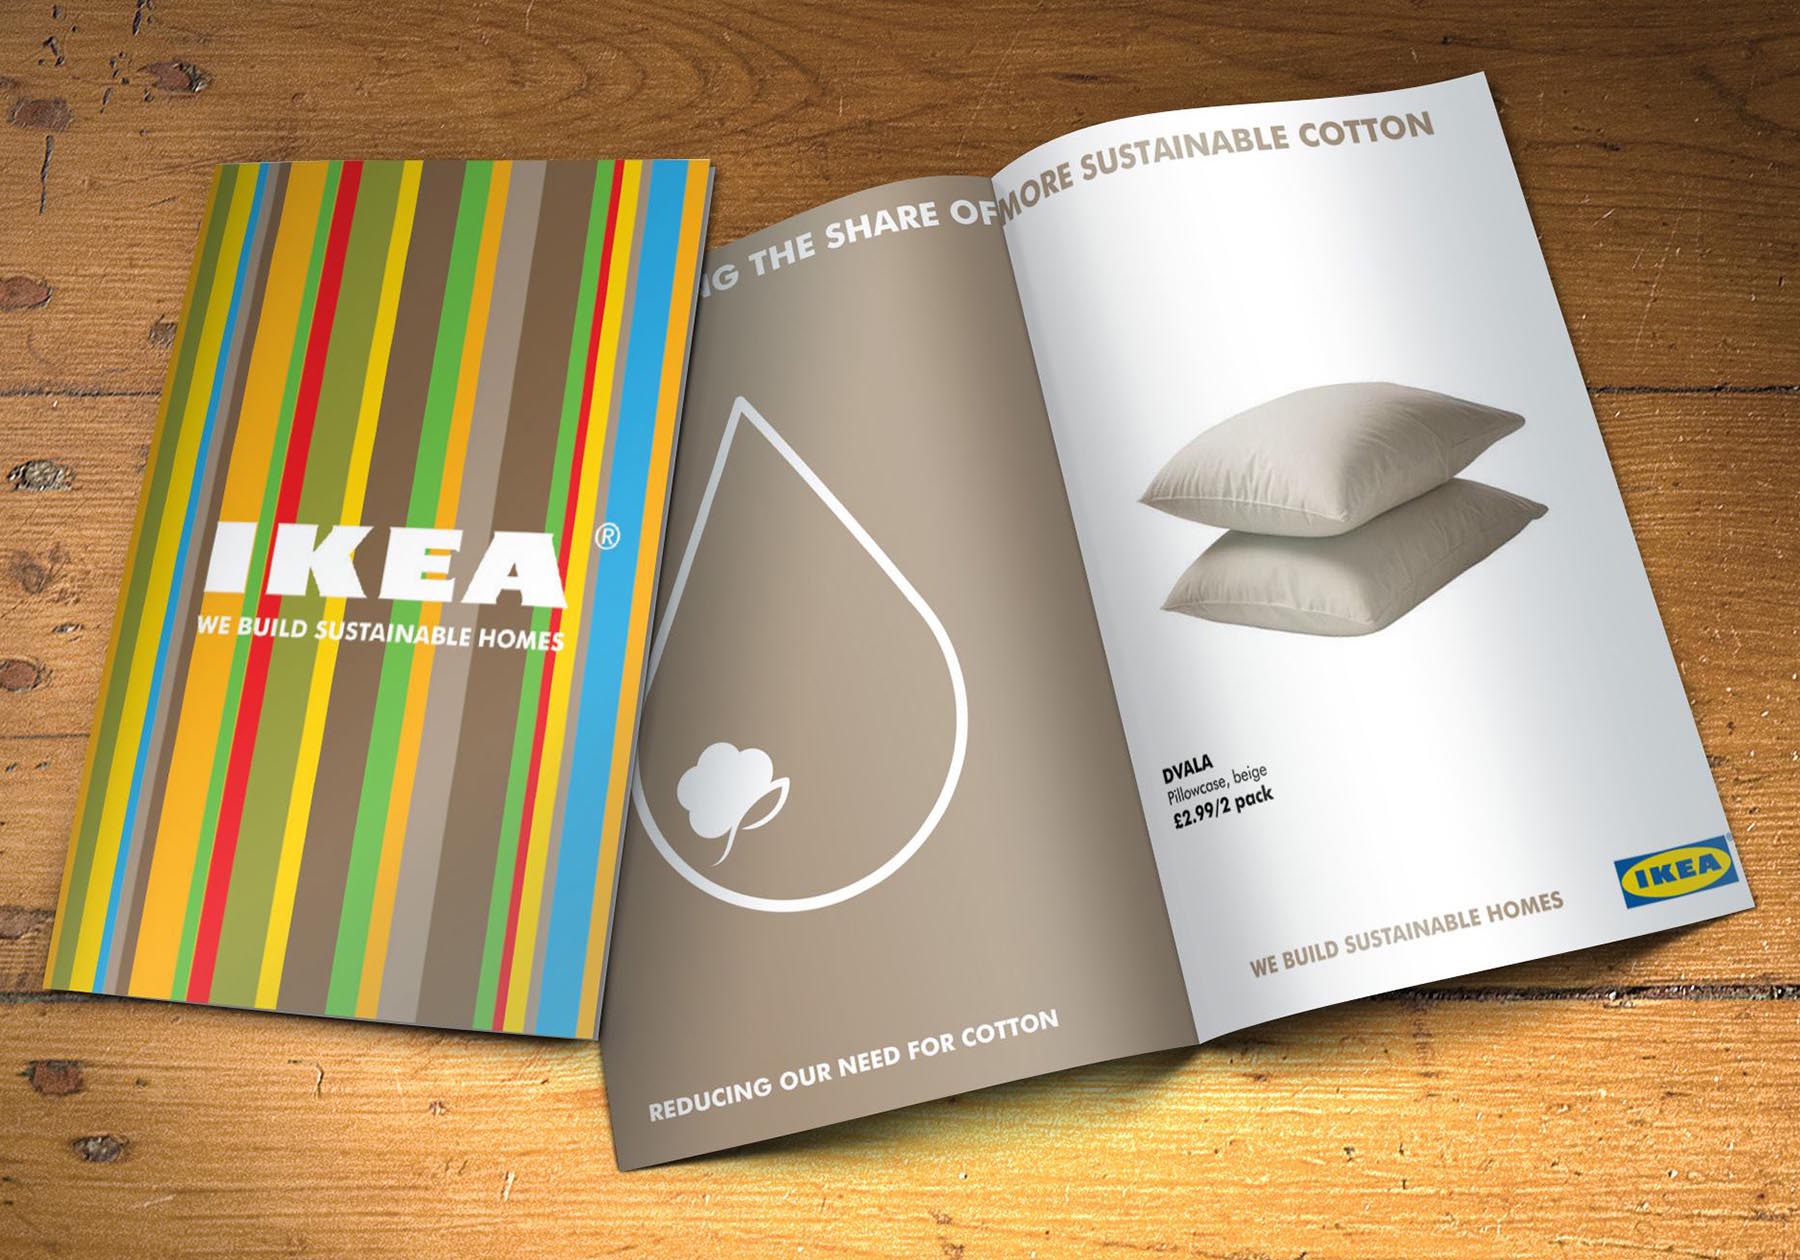 Double page spread for Ikea’s position on sustainable cotton